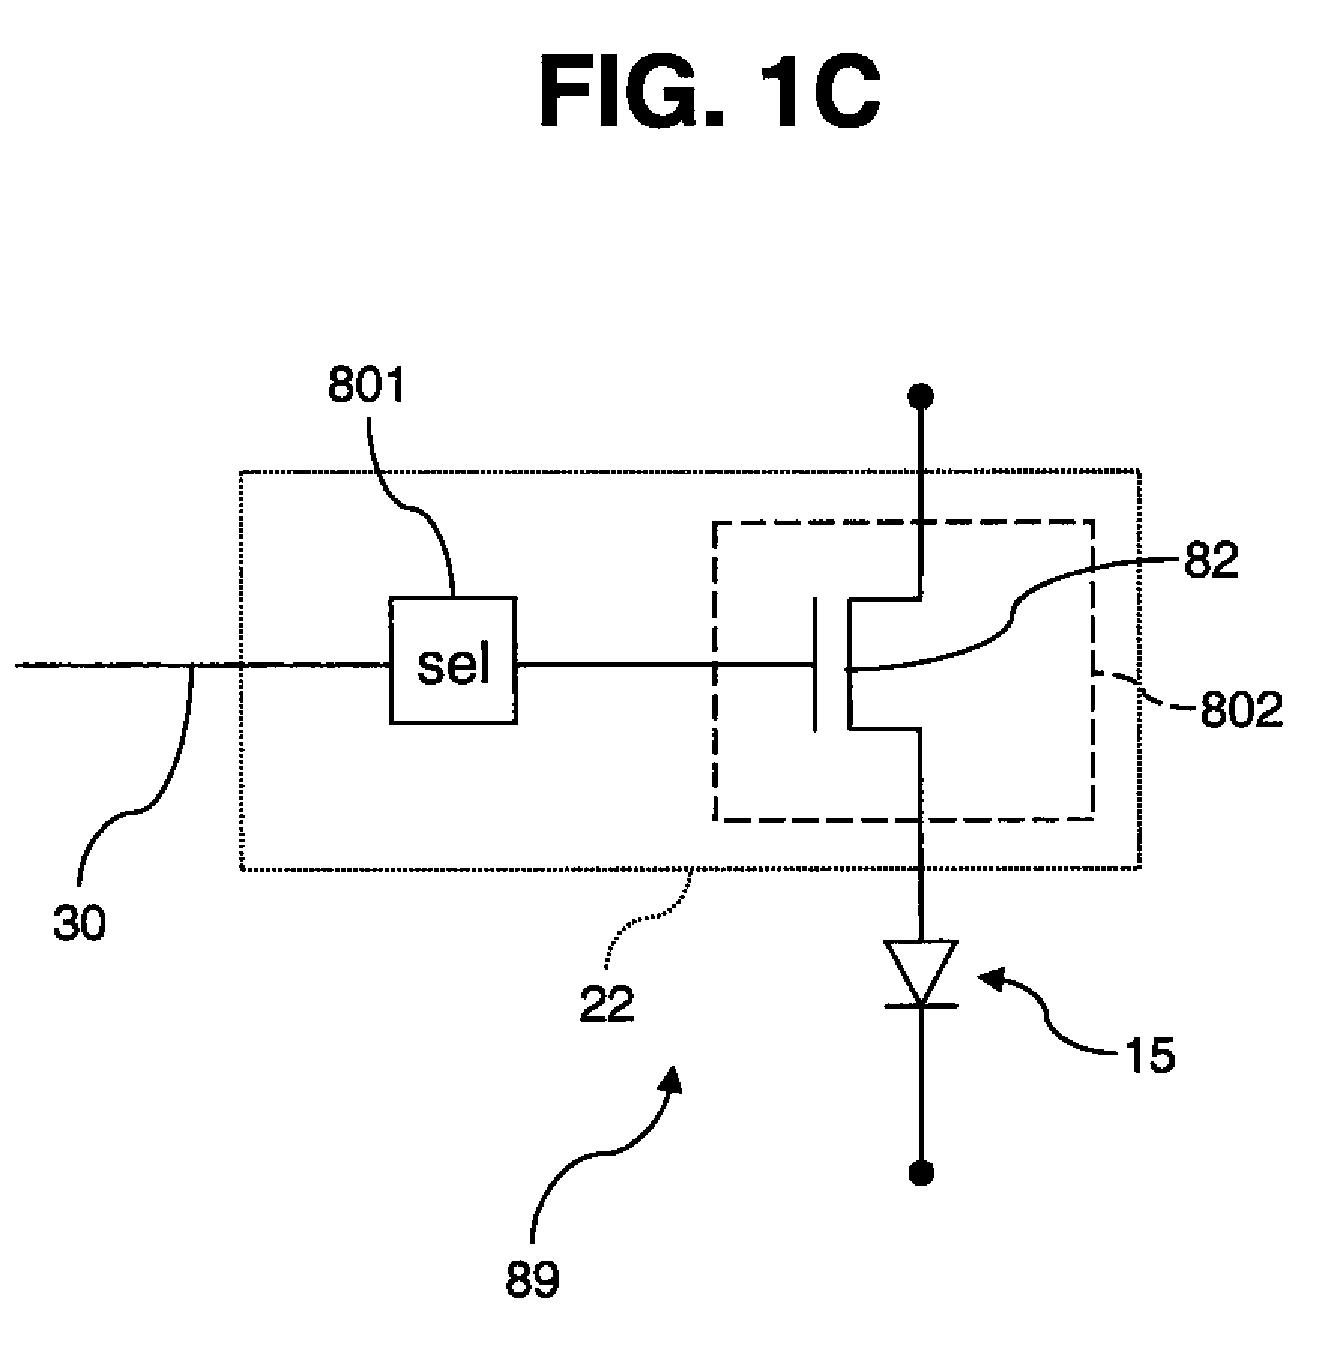 Display device with parallel data distribution